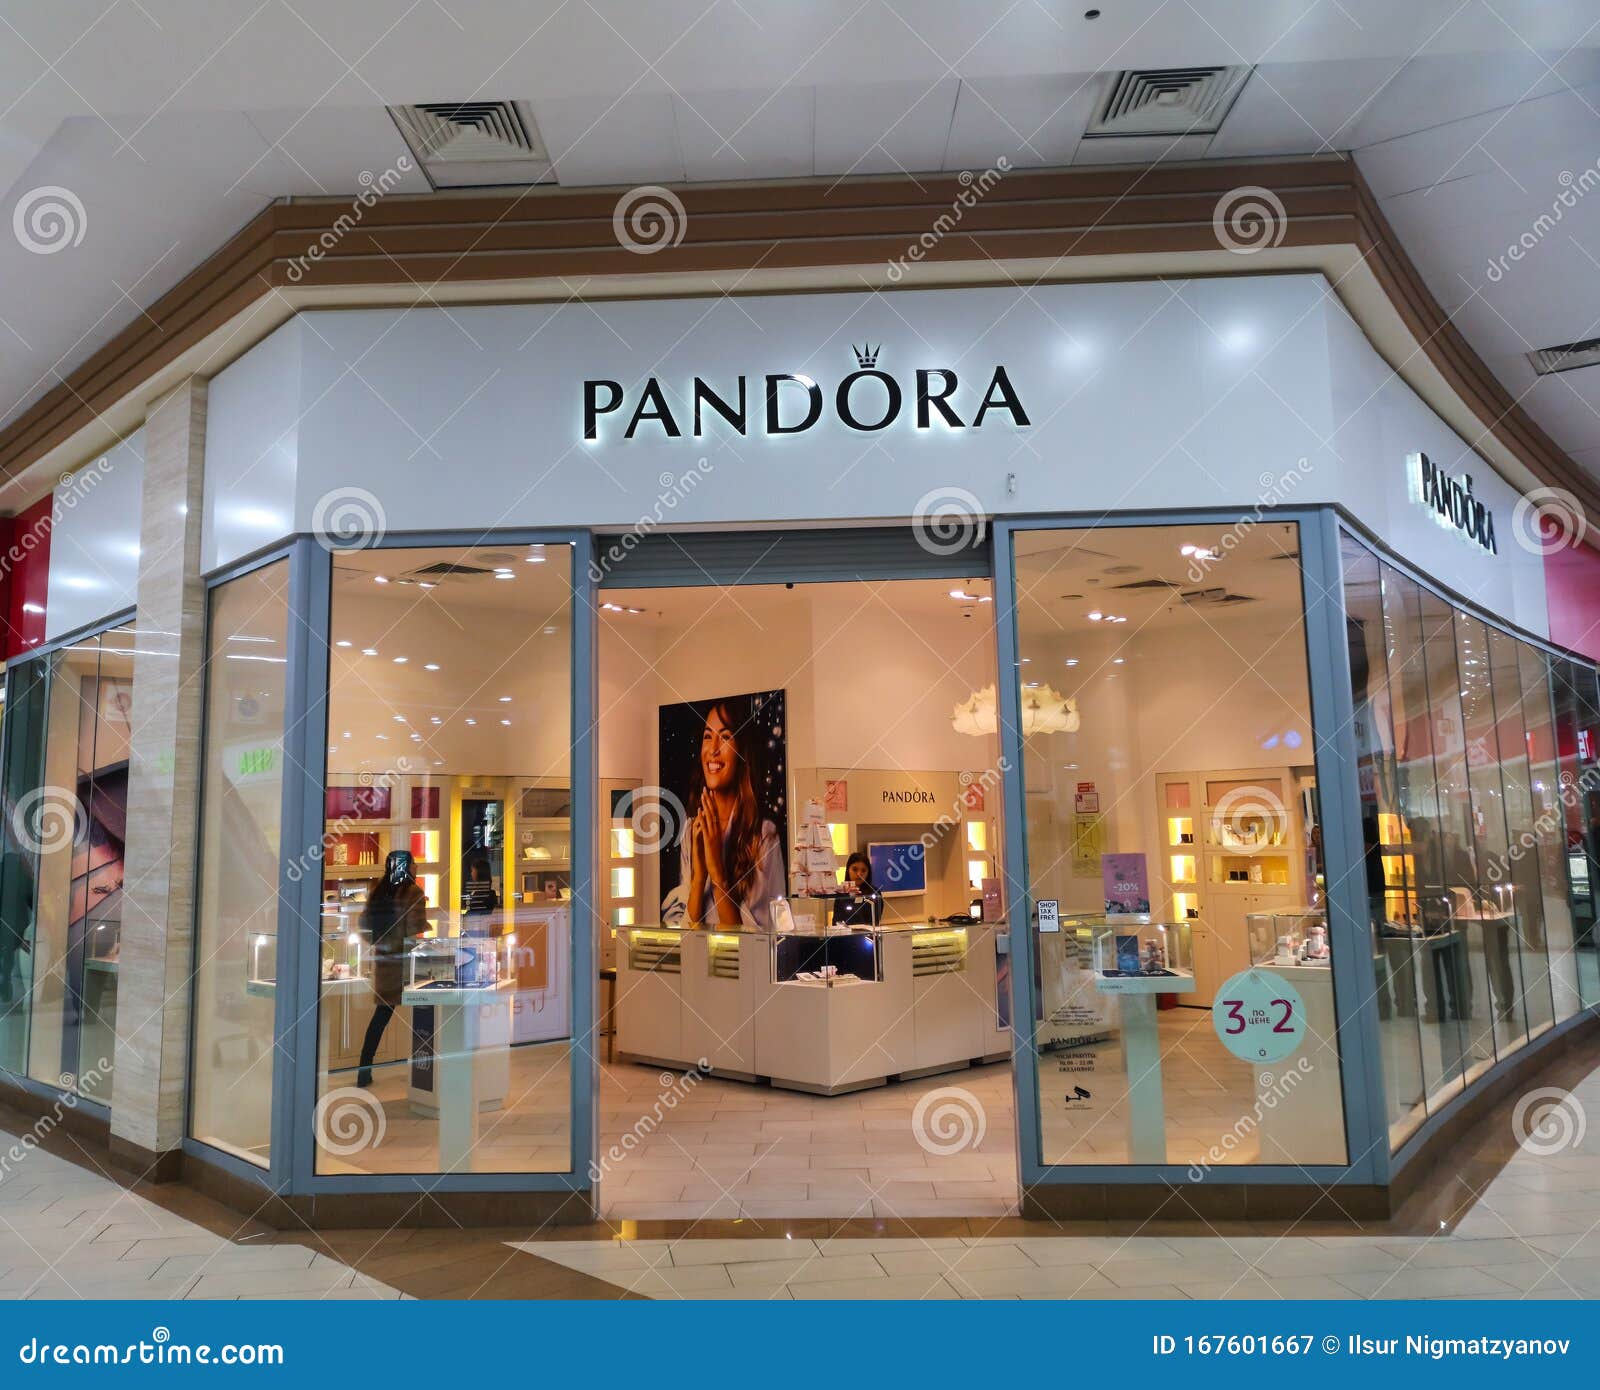 Gold and Silver Jewelry Store PANDORA in a Major Shopping Center on December 20, 2019 Russian Federation City Kazan Victory Editorial Photography - Image of diamonds, gold: 167601667